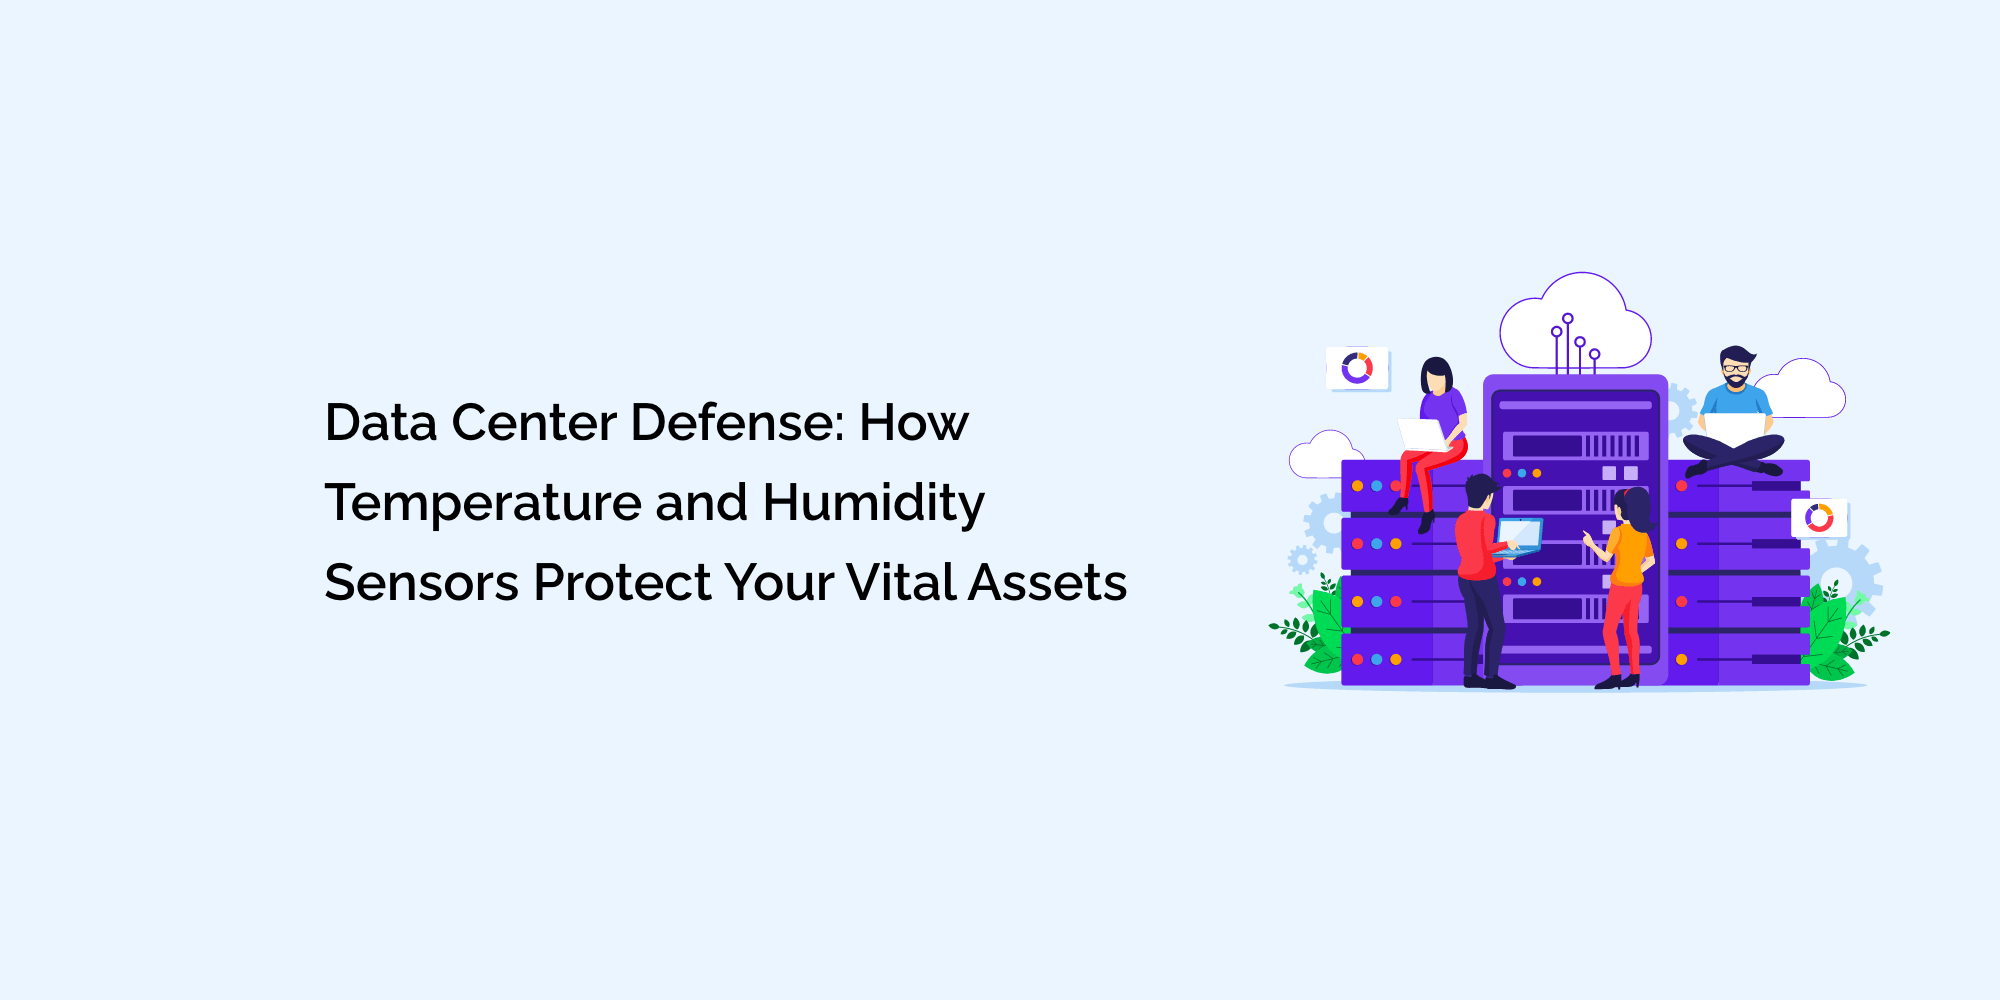 Data Center Defense: How Temperature and Humidity Sensors Protect Your Vital Assets